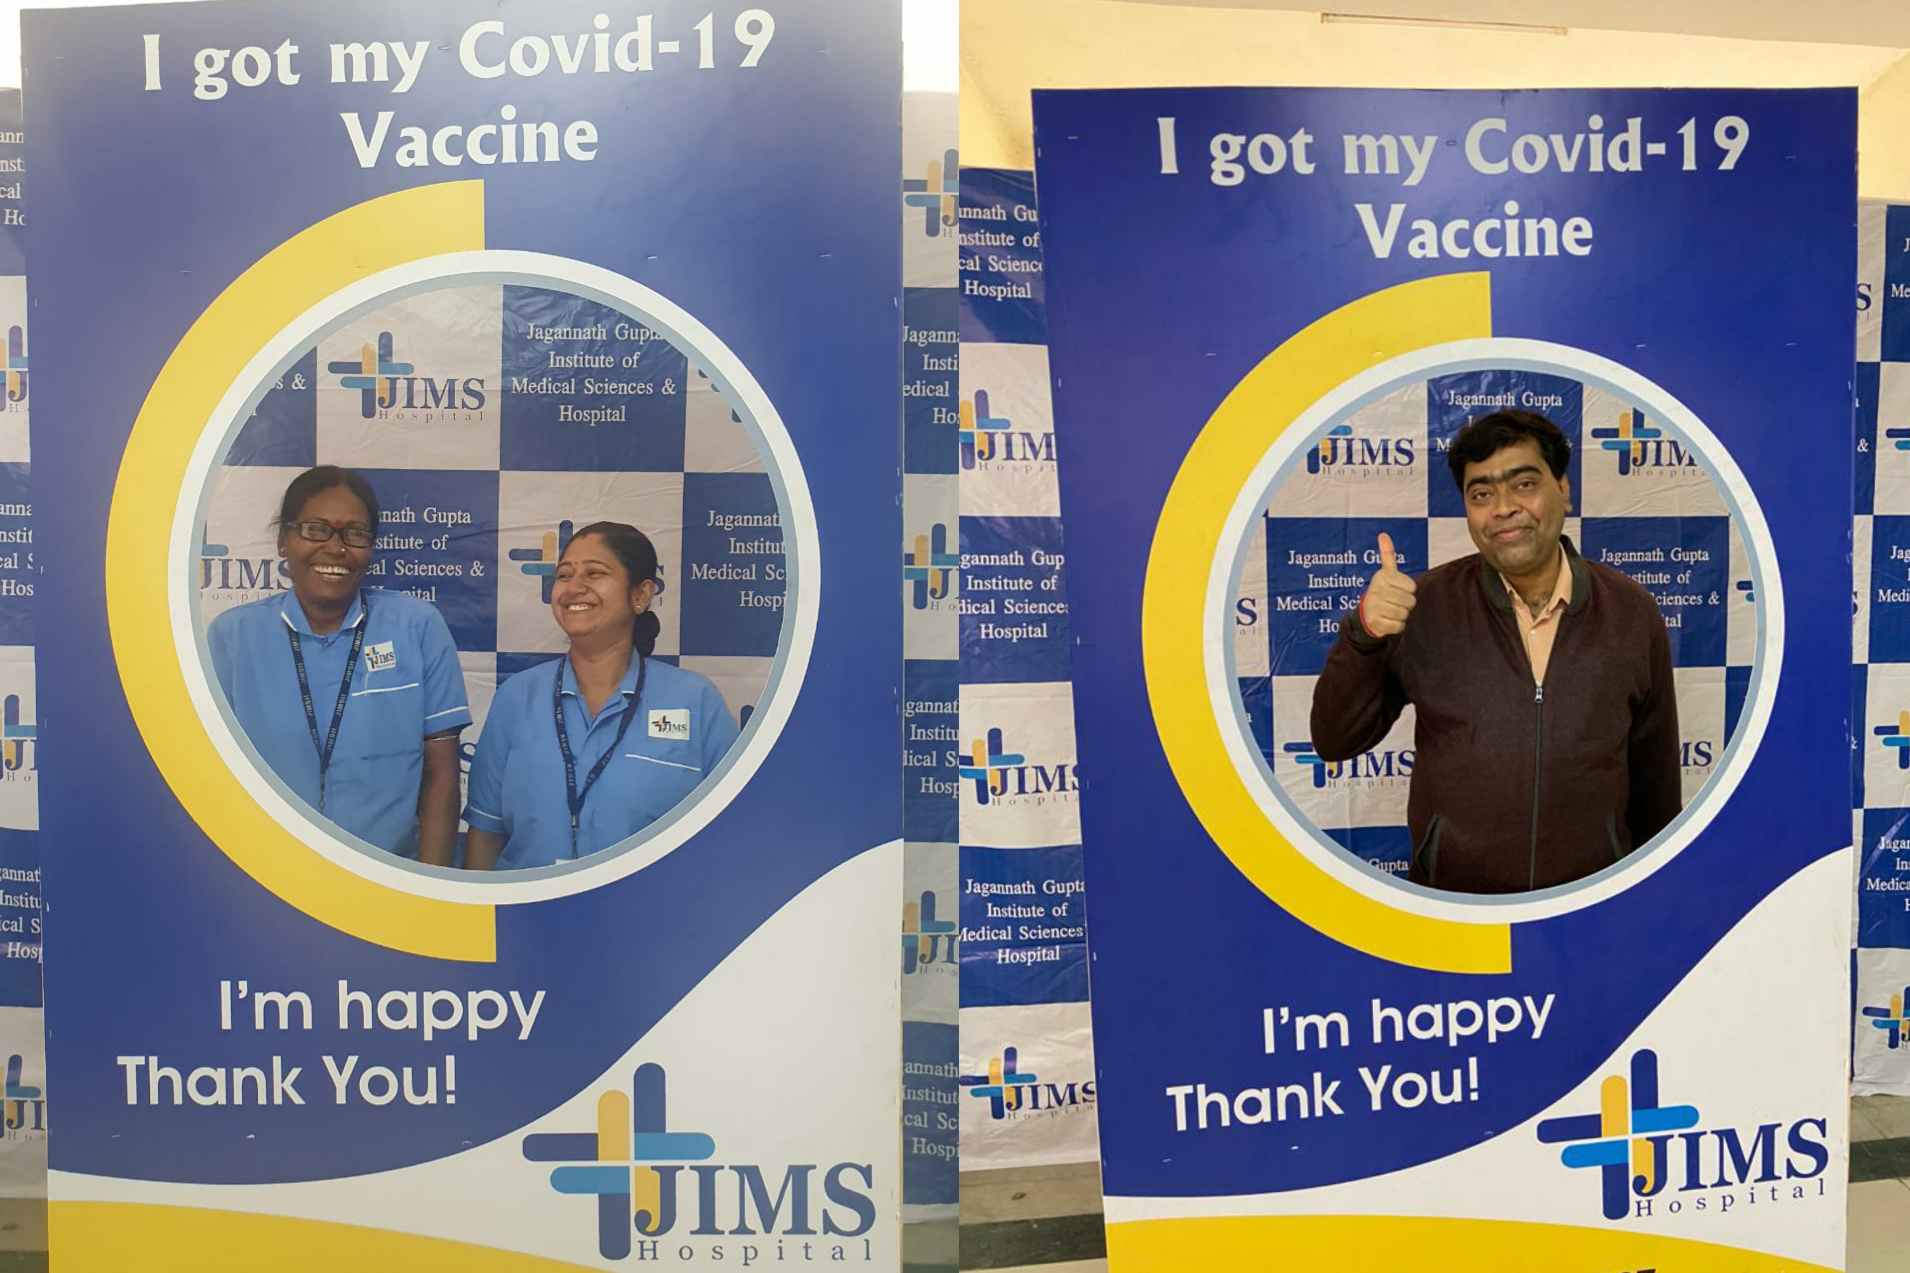 Jagannath Gupta Institute of Medical Sciences & Hospital has conducted the COVID-19 vaccine process